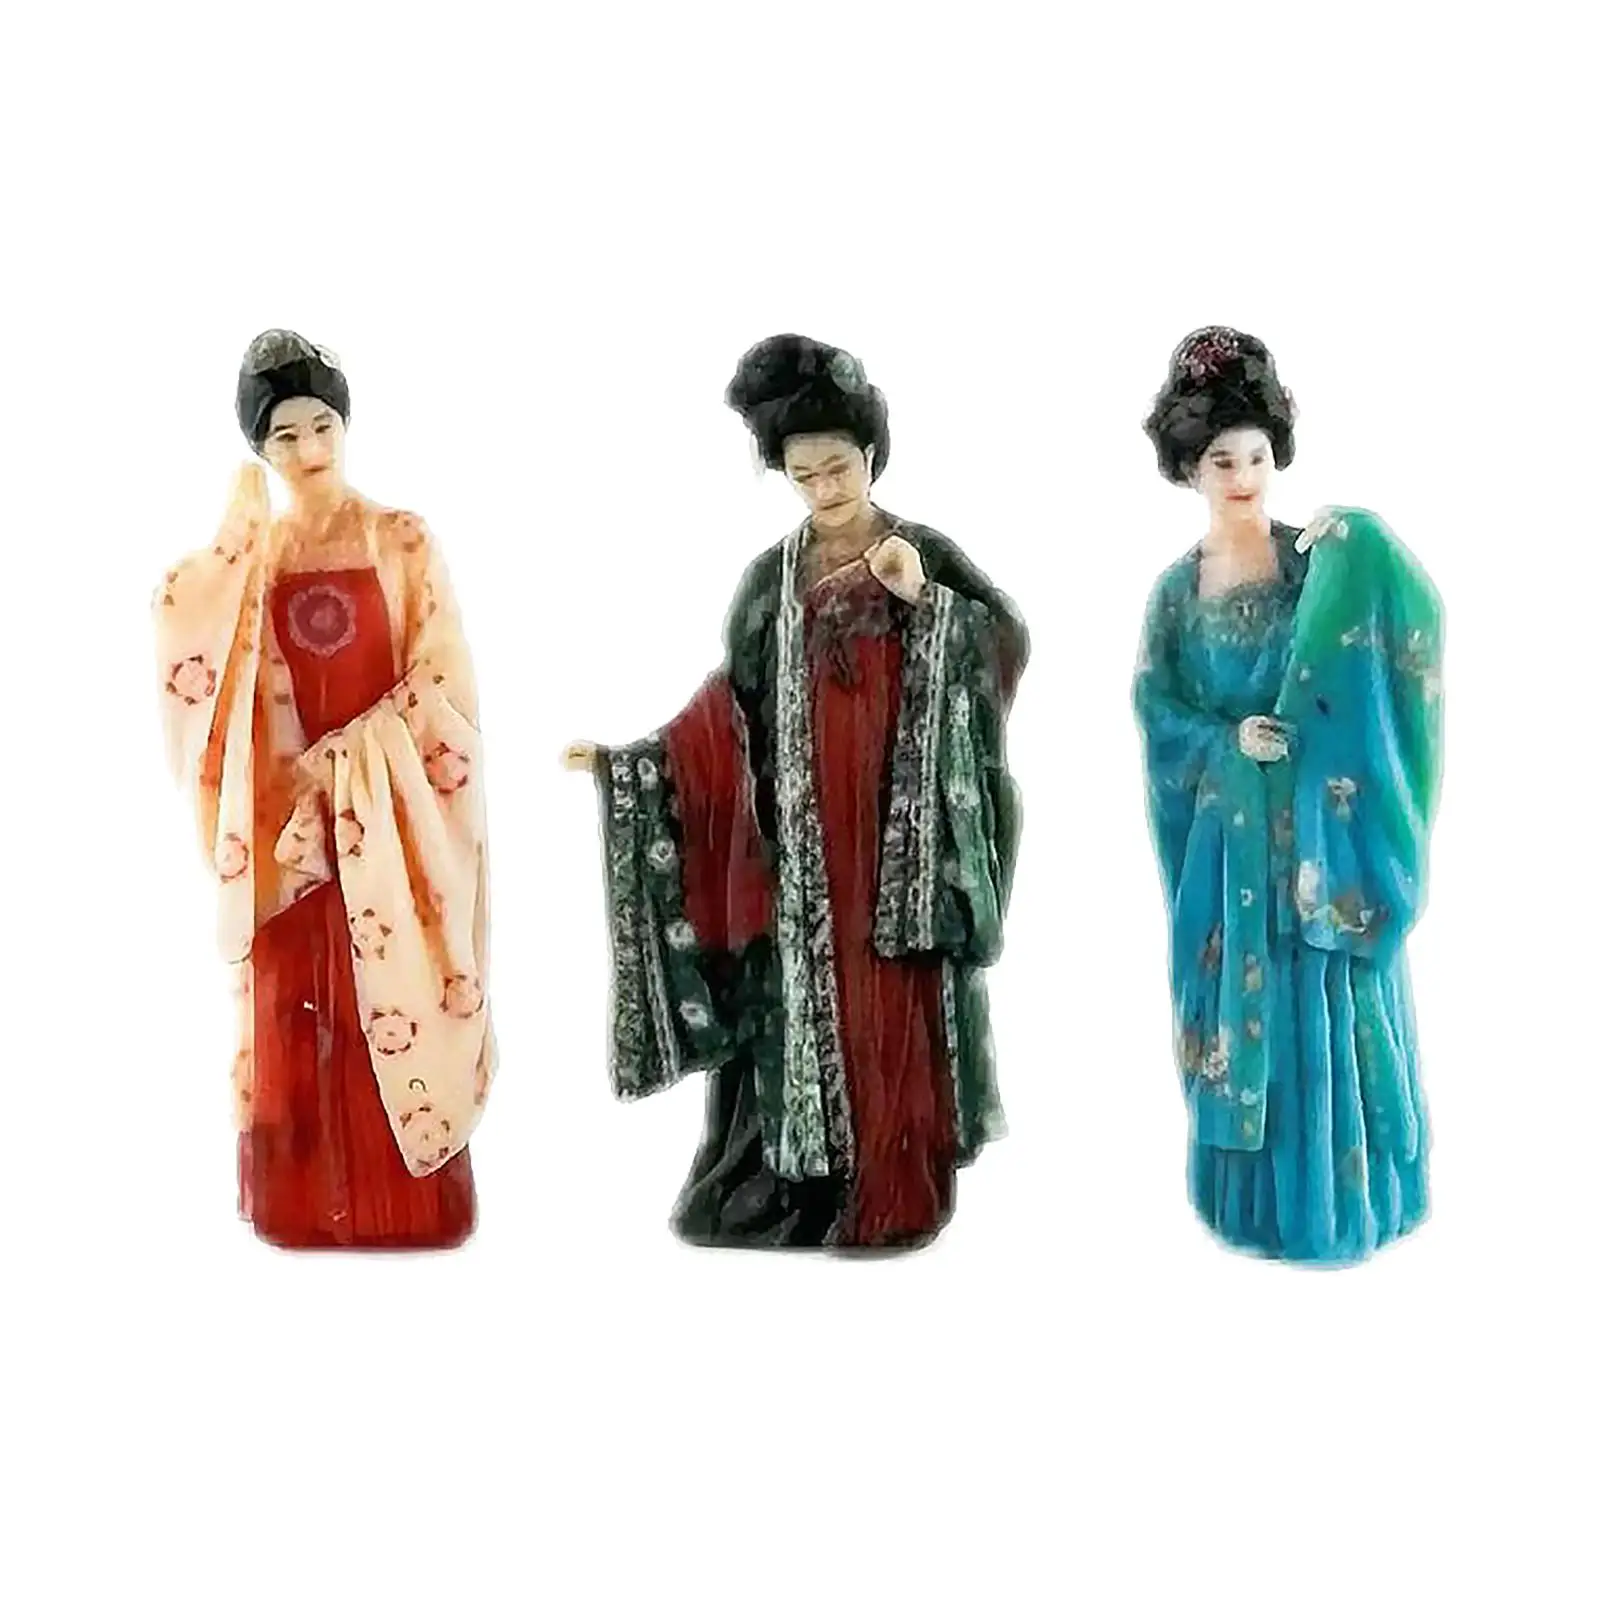 1:64 Miniature Model Figures Handpainted China Ancient Doll Statue Ancient Beautiful Women Statue for Scenery Landscape Layout